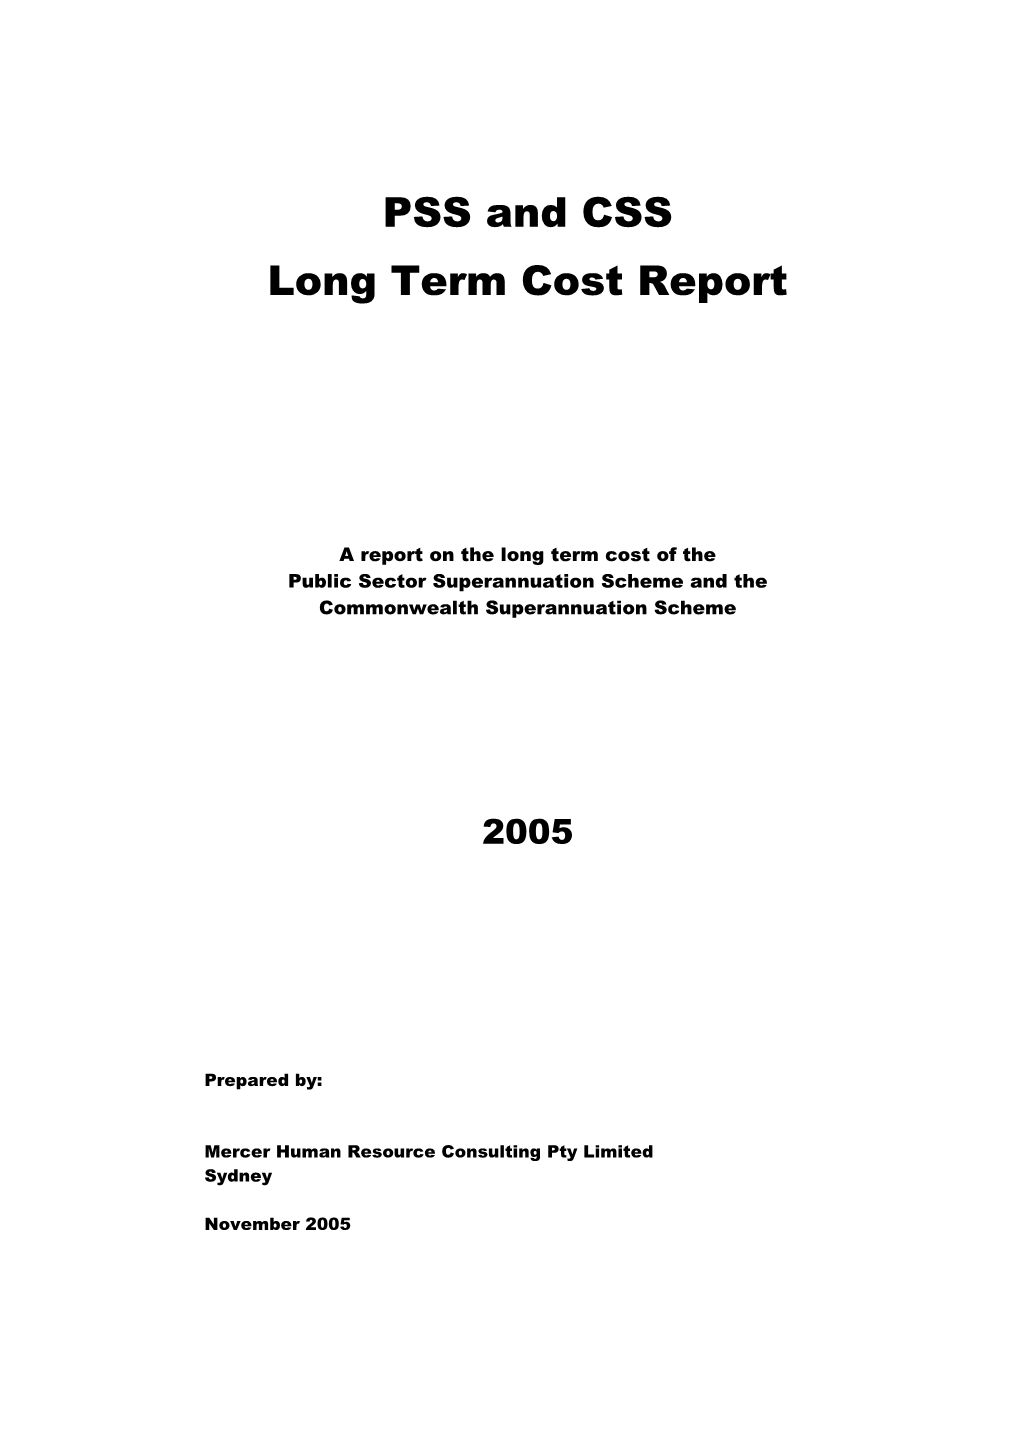 PSS and CSS Long Term Cost Report 2005